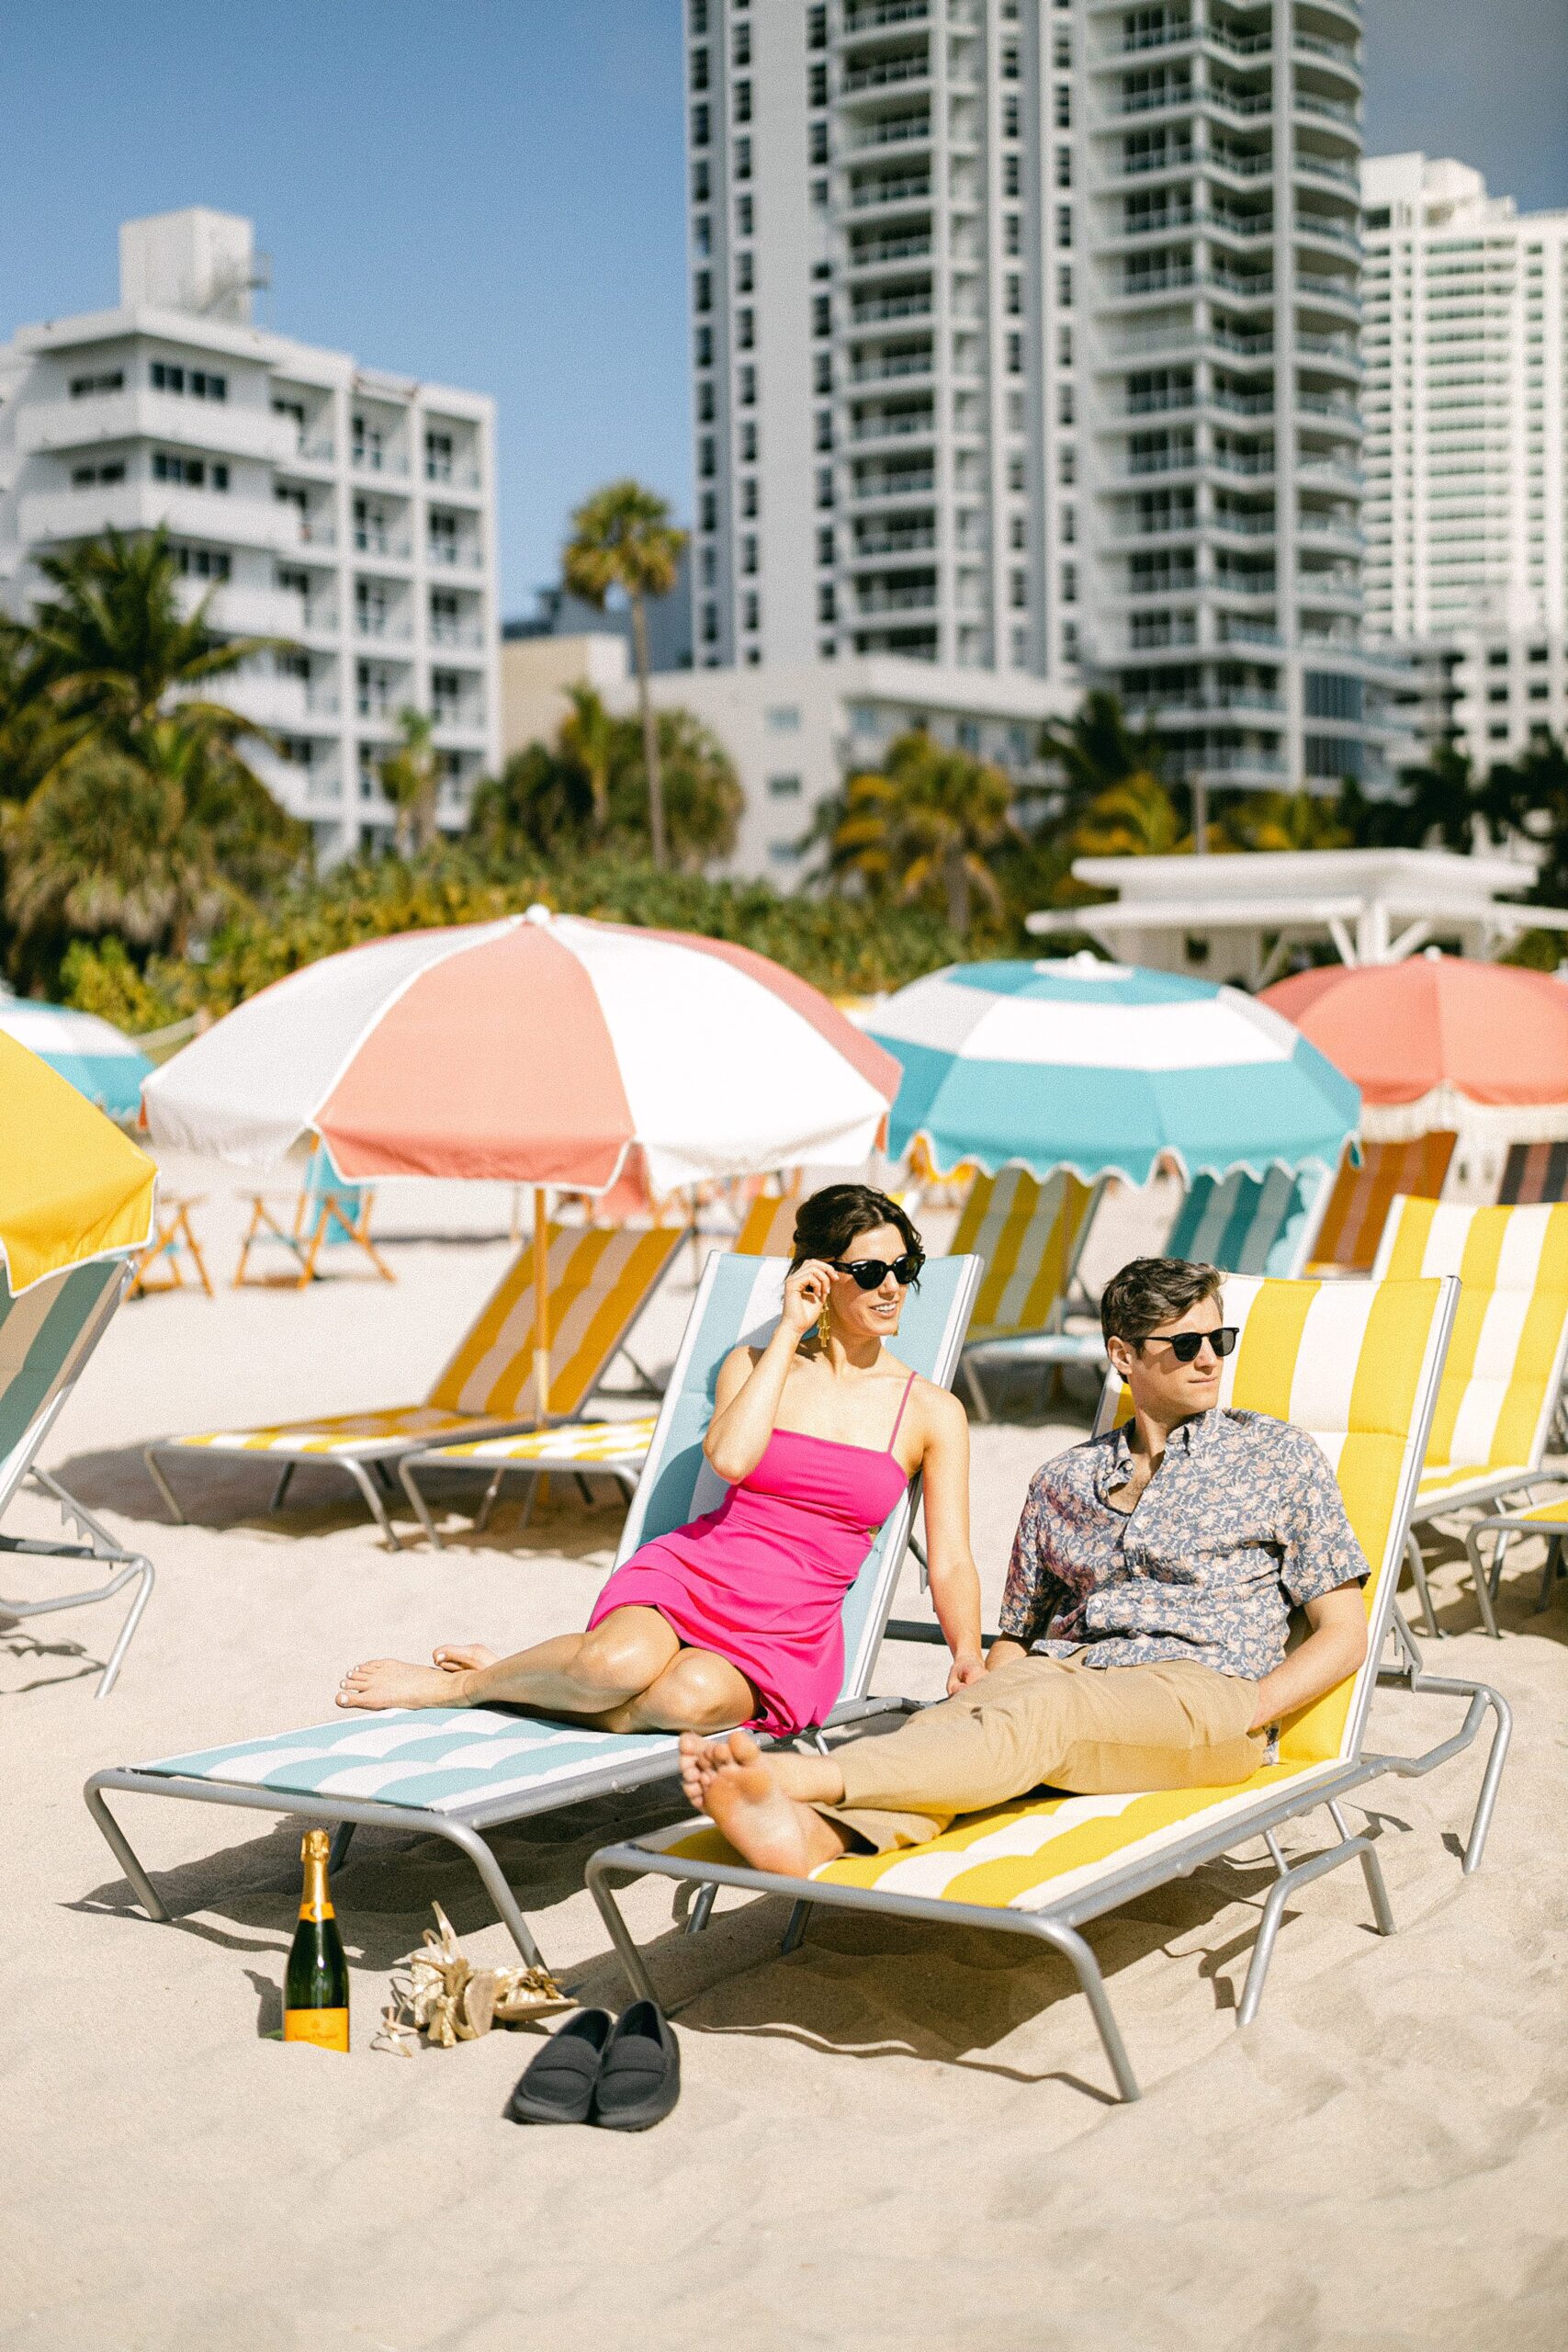 The engaged couple sitting at the iconic art deco lounge chairs at The Confidante Hotel in MIami Beach.